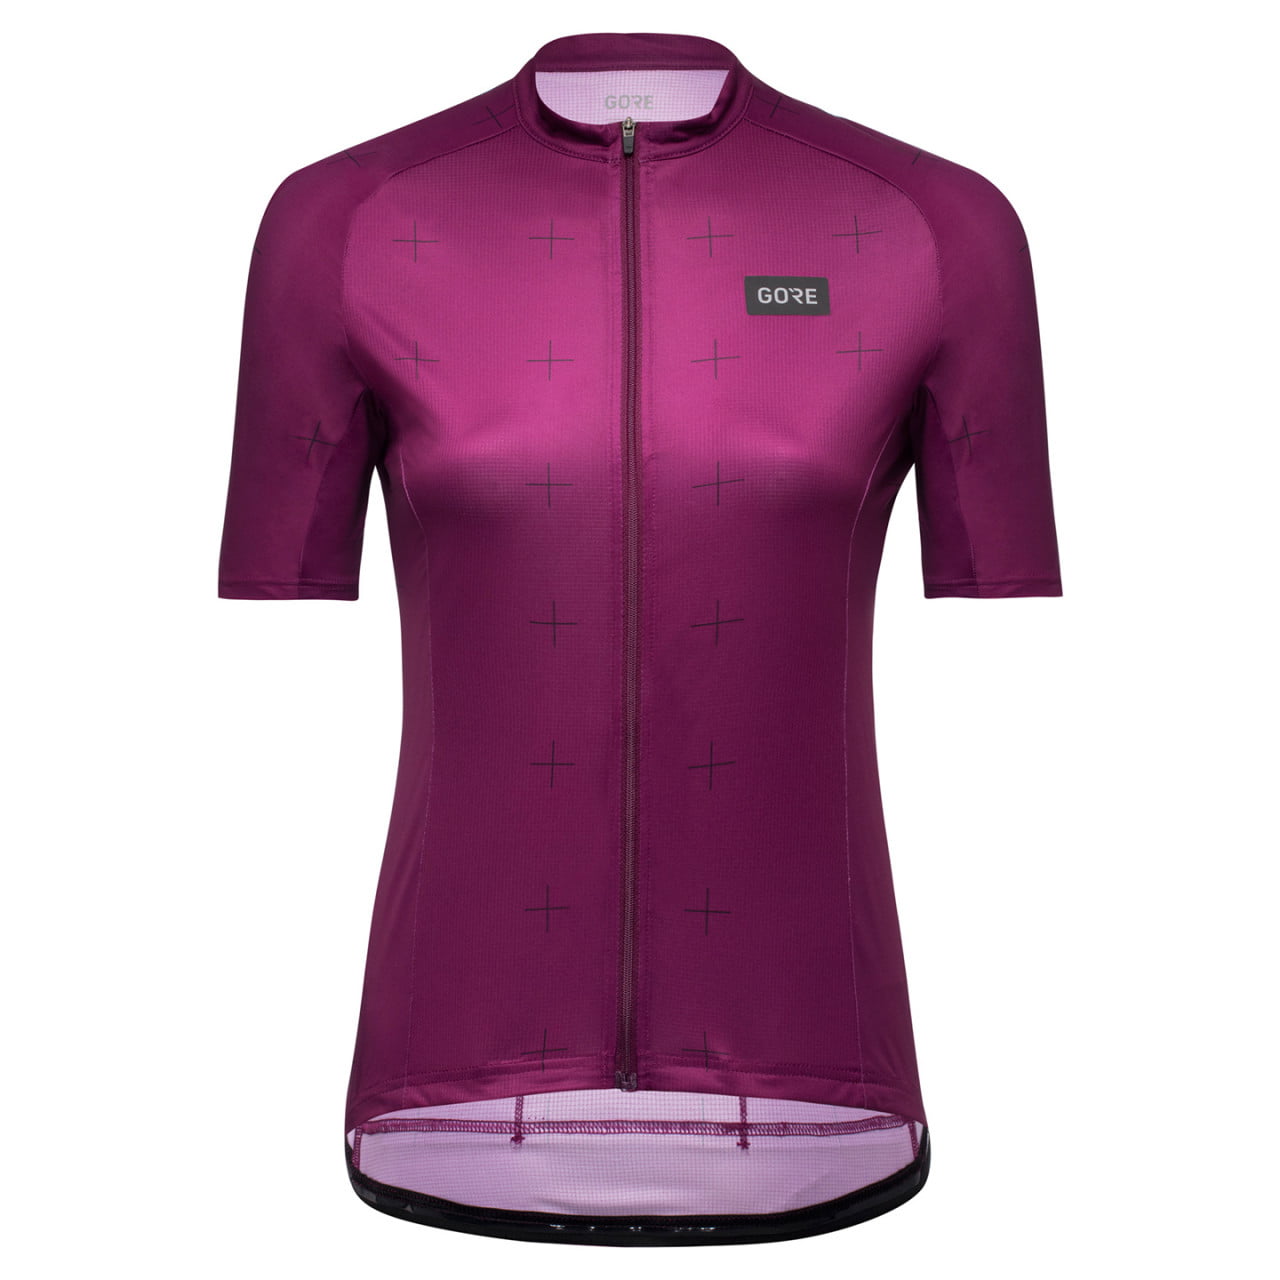 Daily Women's Jersey